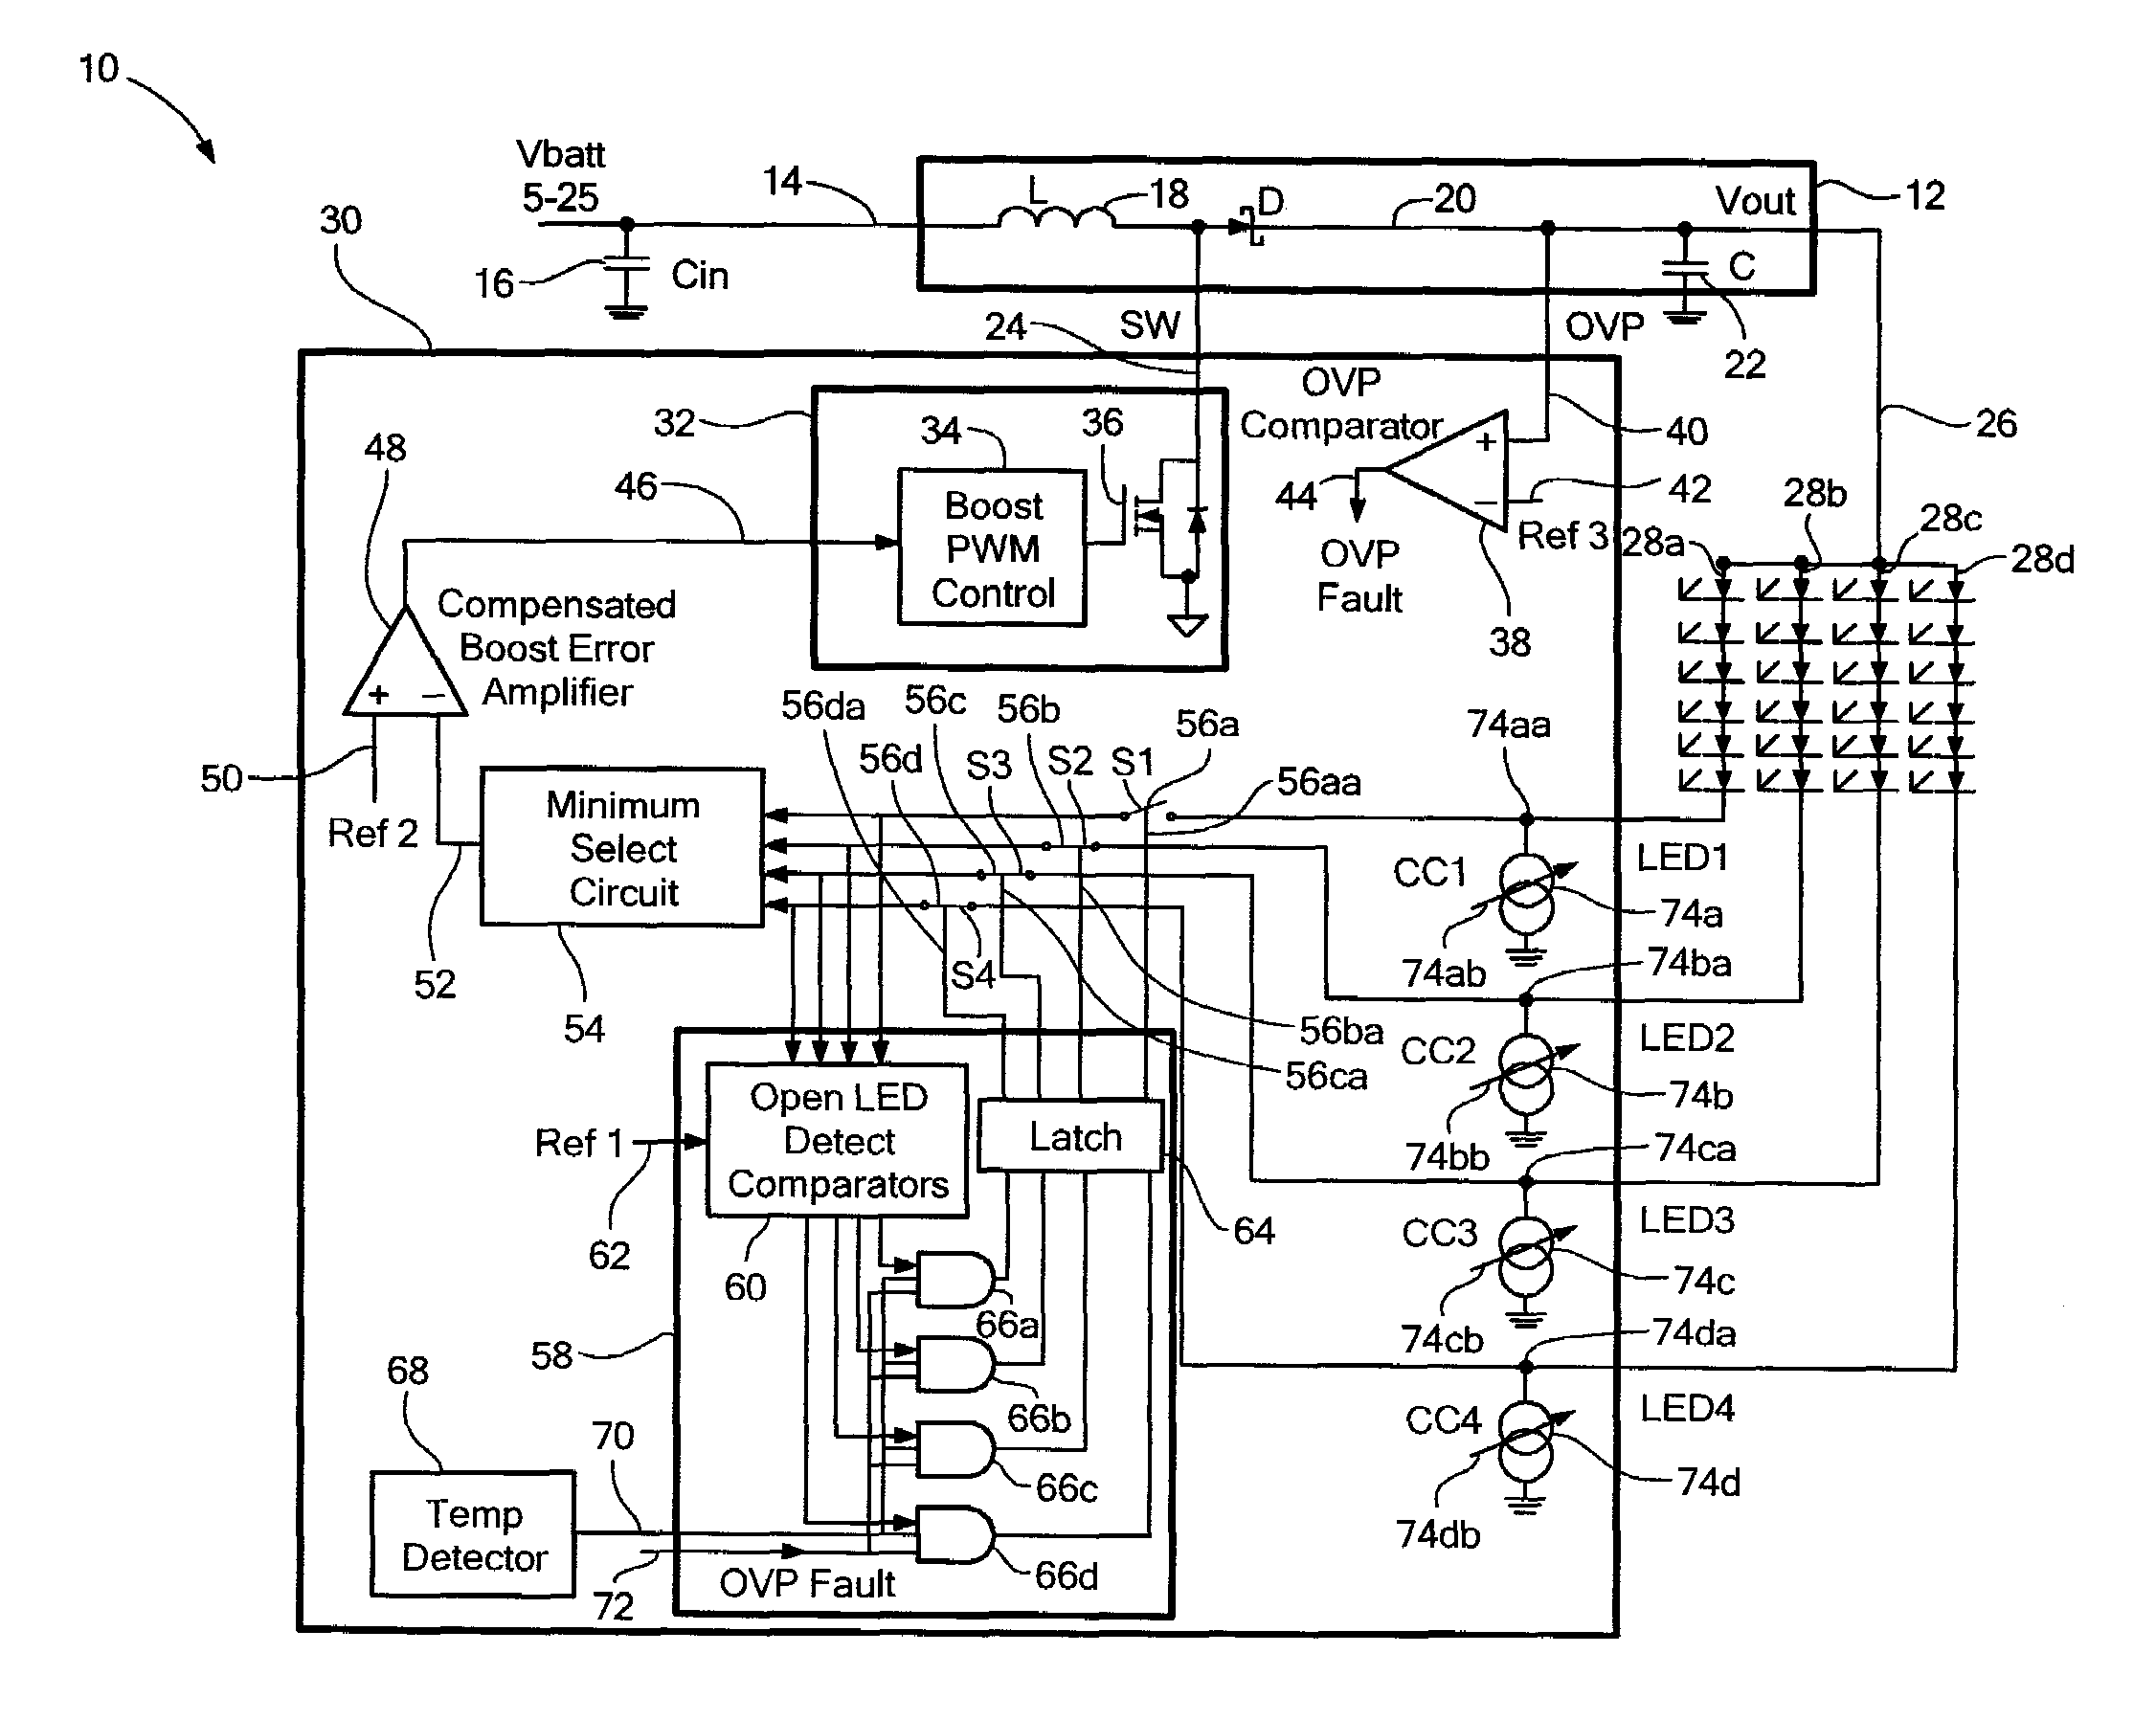 Electronic circuit for driving a diode load